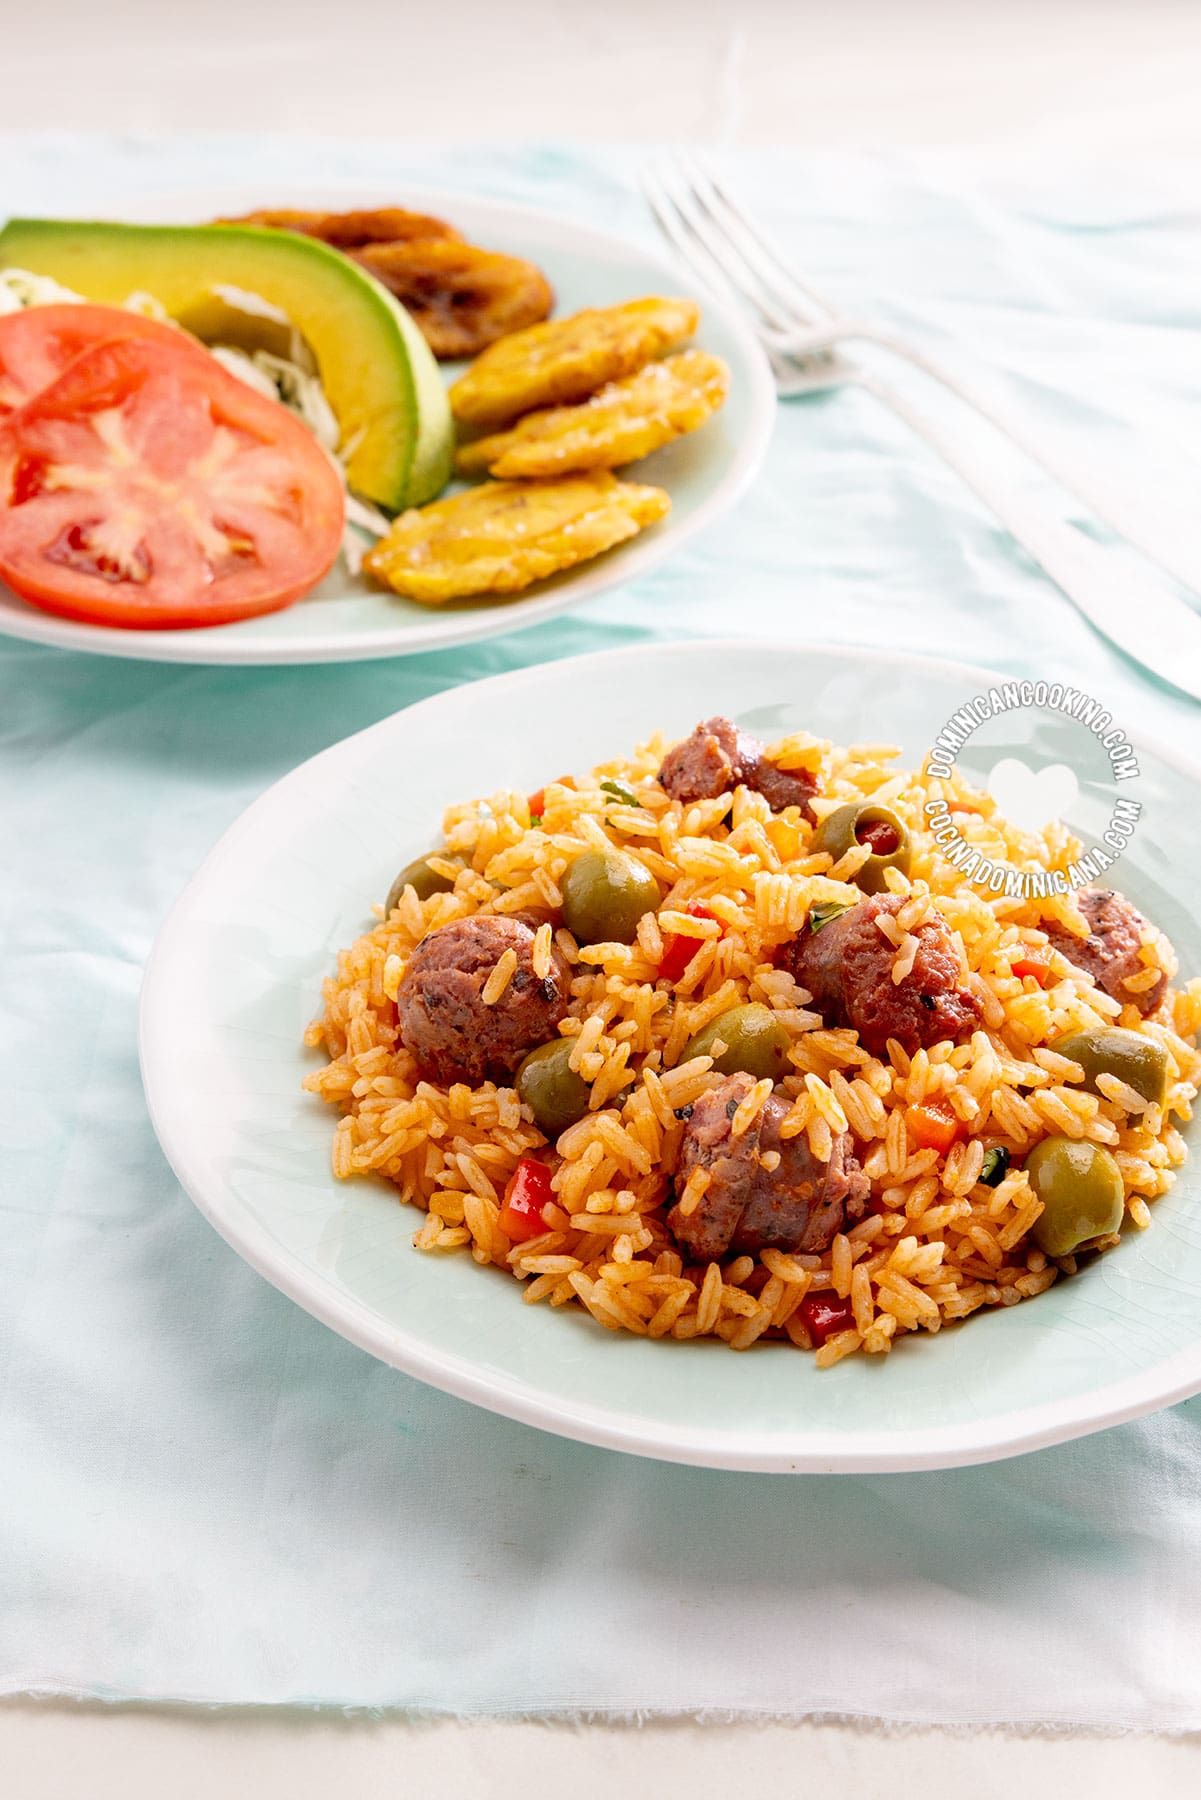 Rice with Dominican sausage.